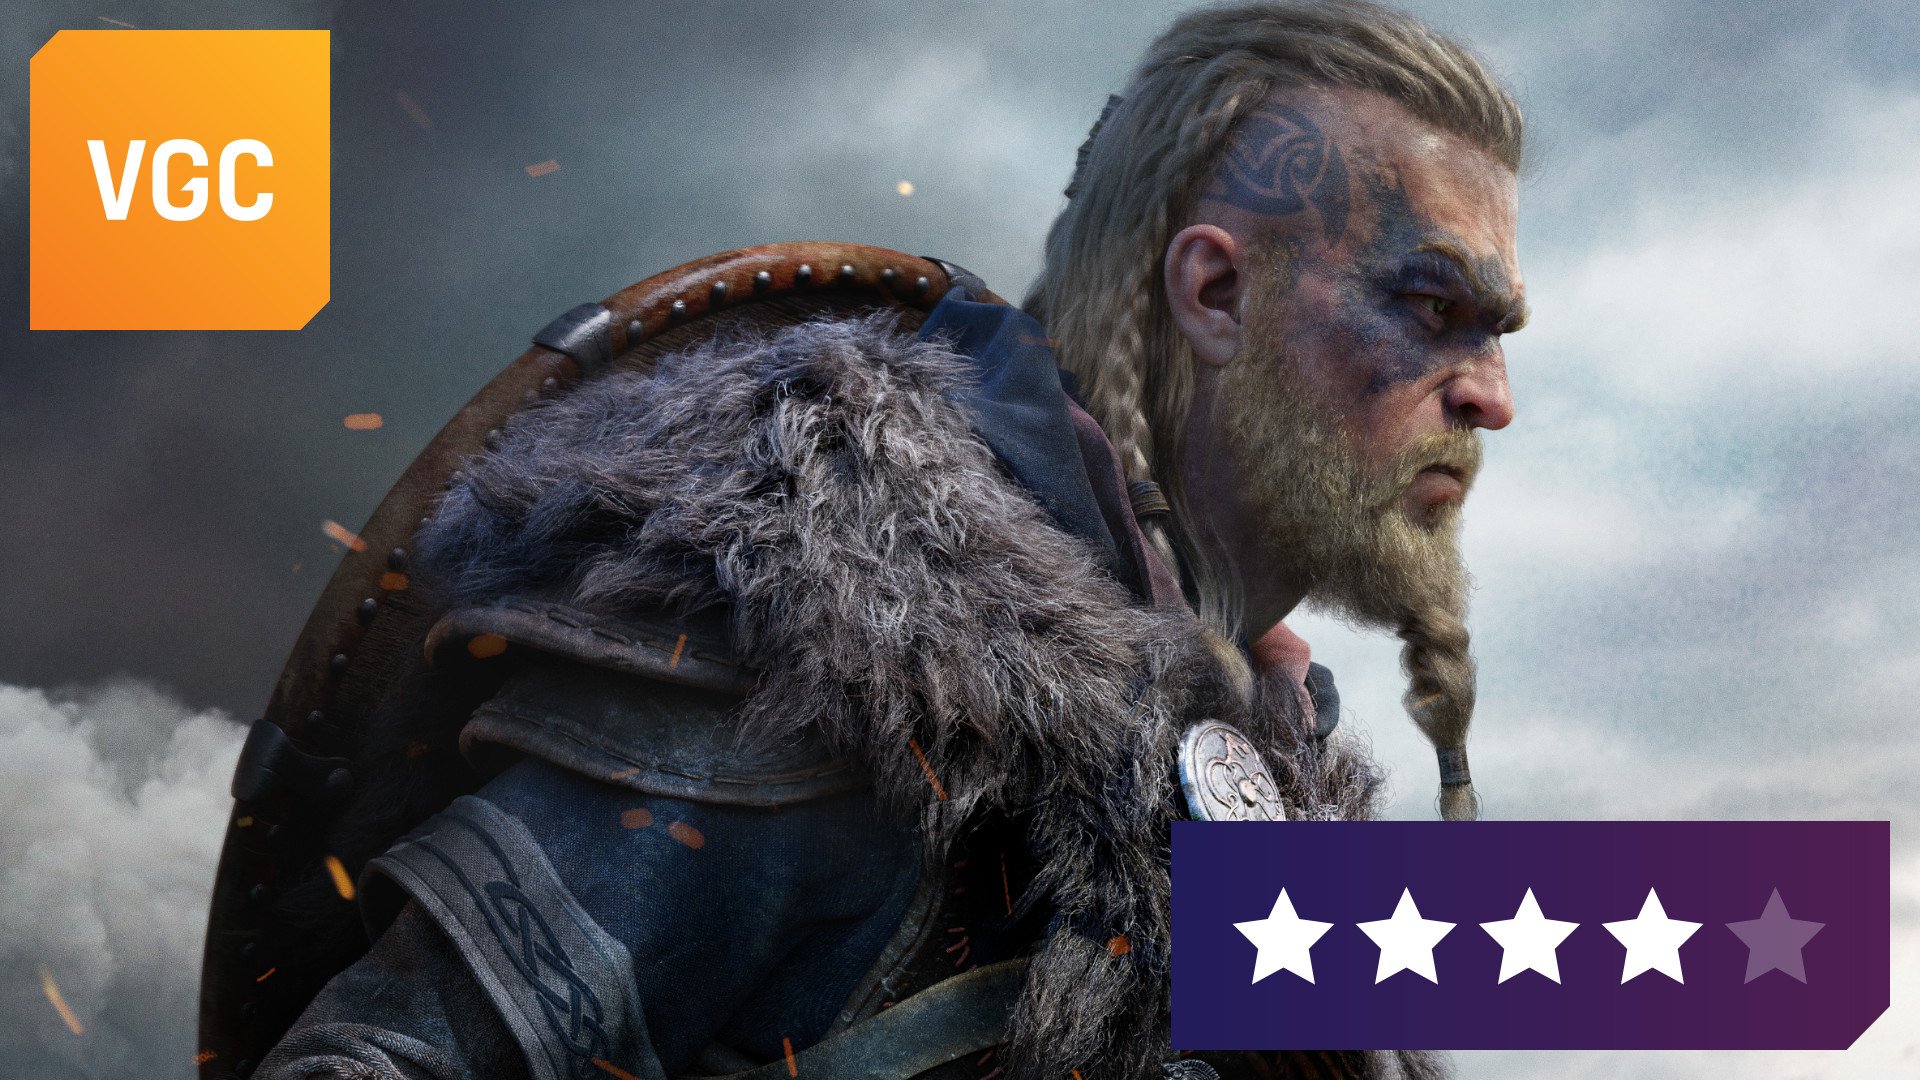 Assassin's Creed Valhalla review: Vikings marauders become nice